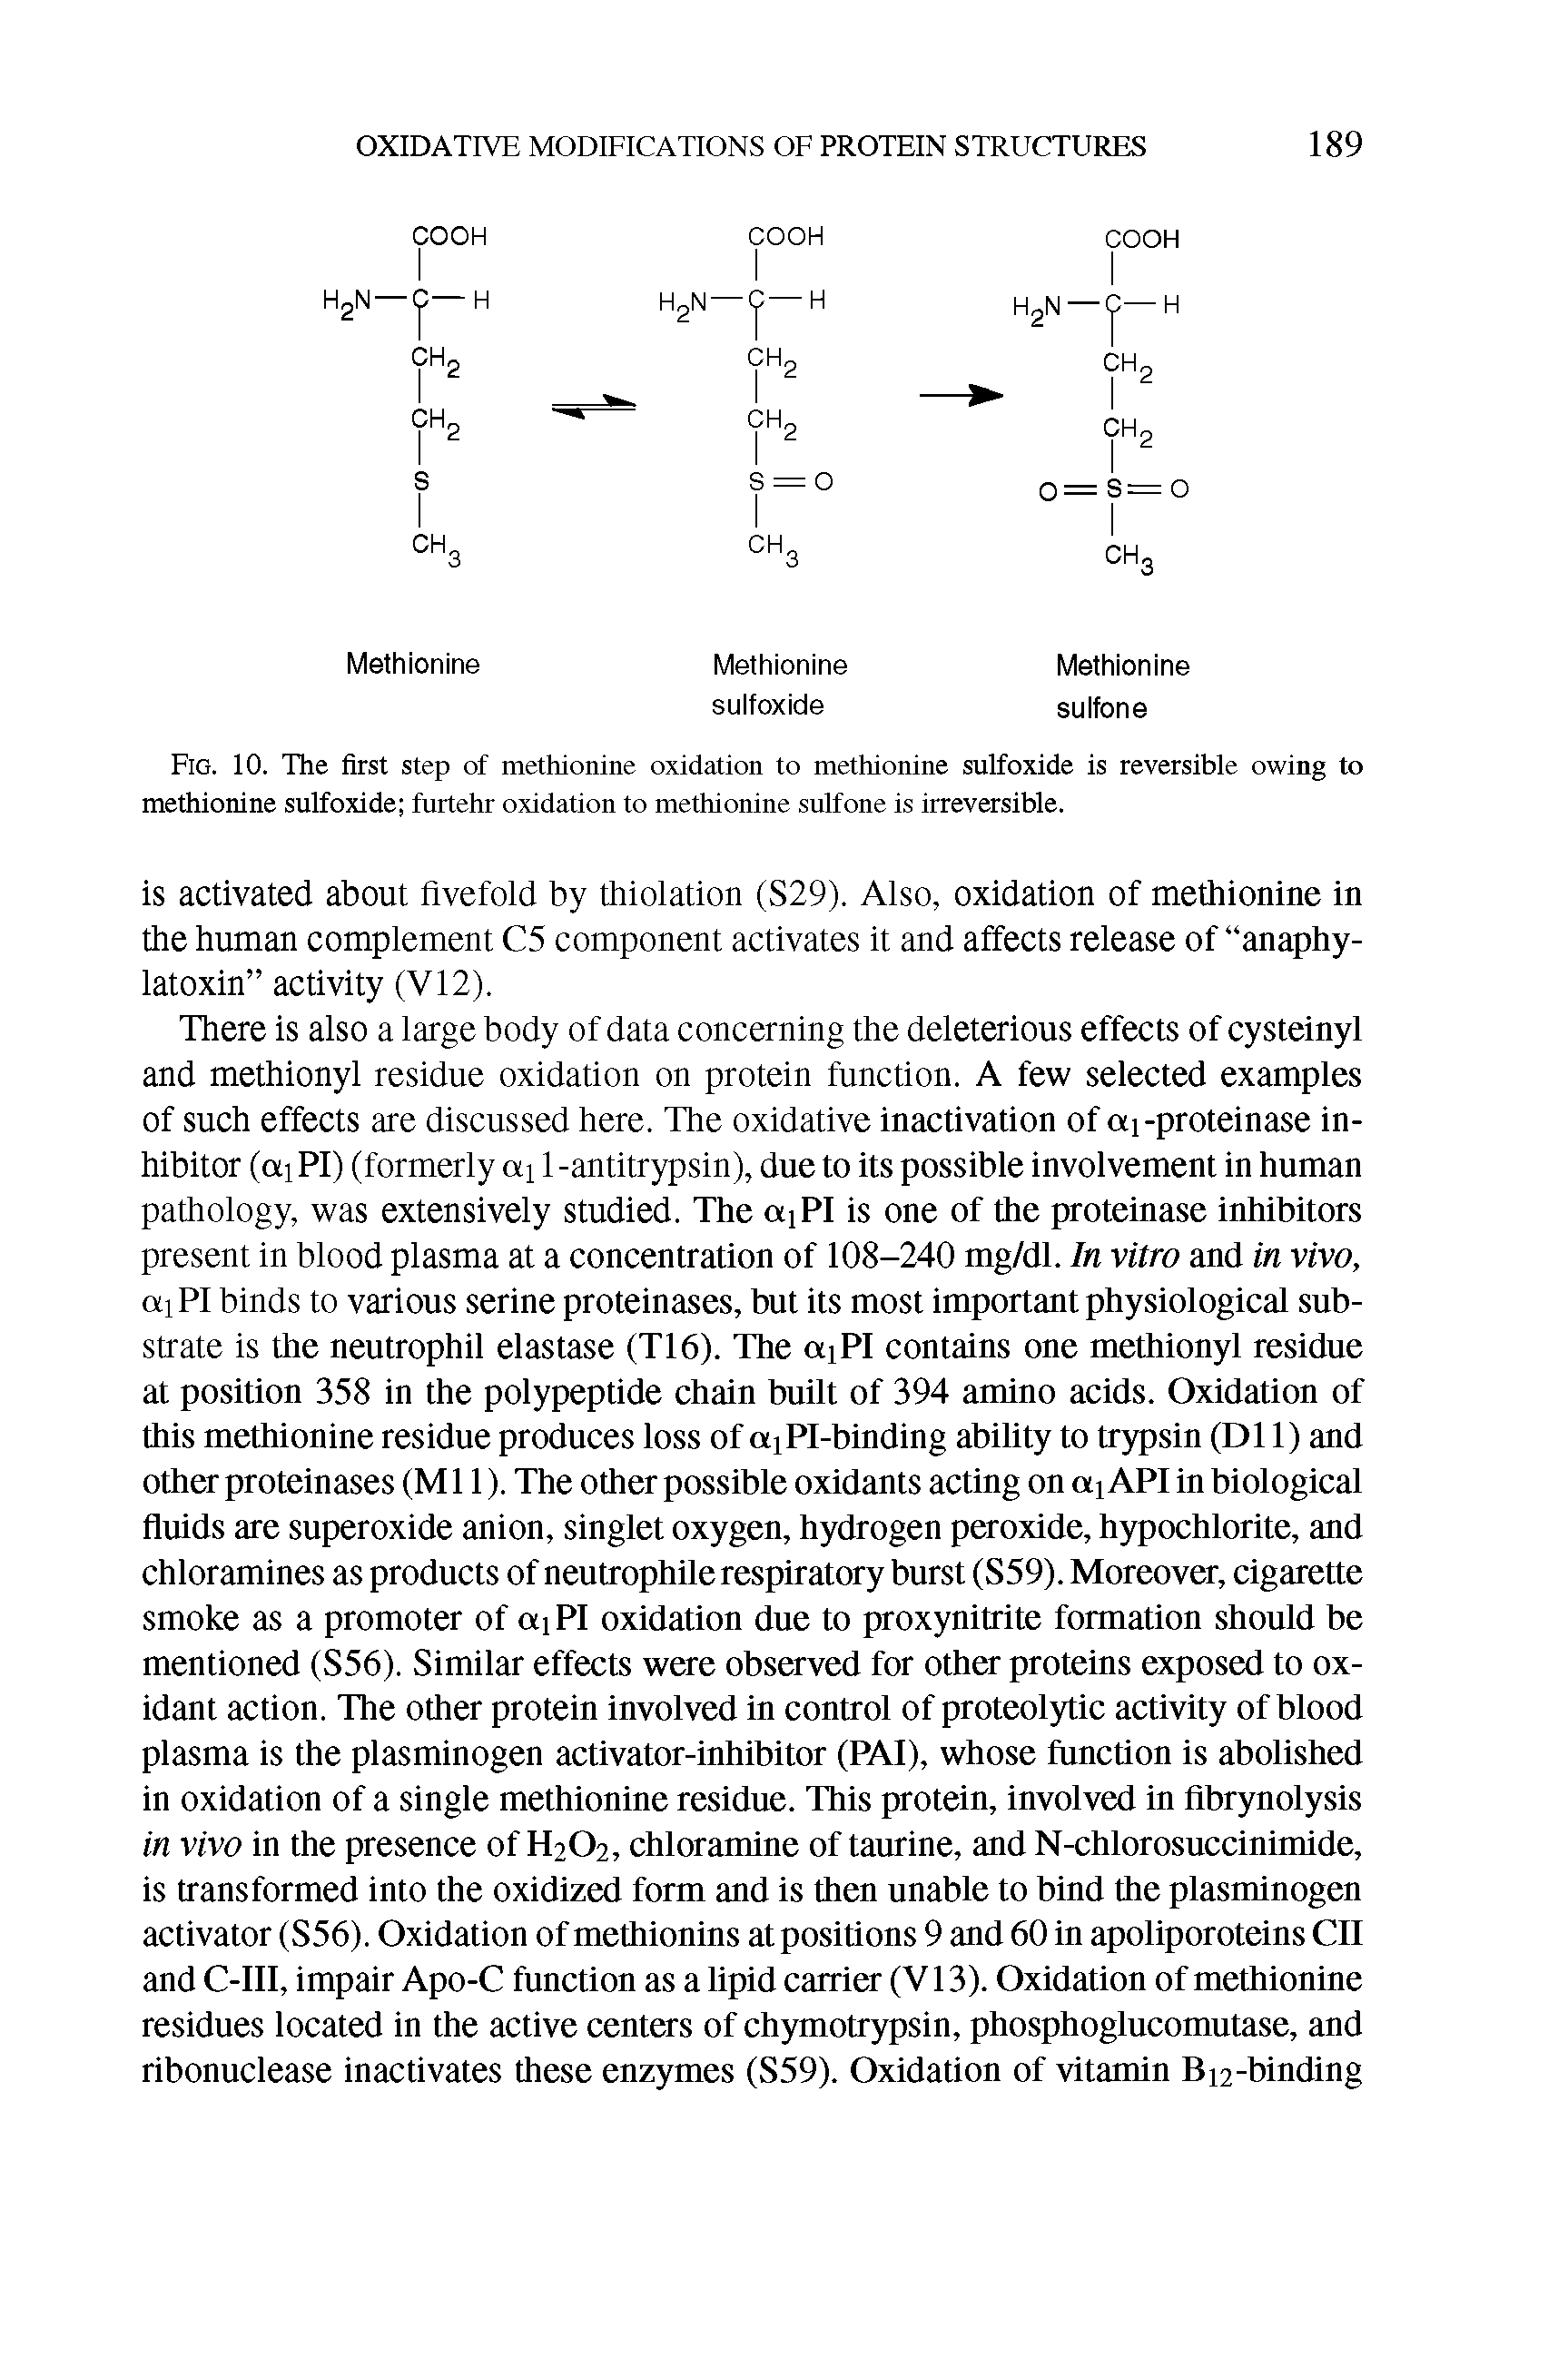 Fig. 10. The first step of methionine oxidation to methionine sulfoxide is reversible owing to methionine sulfoxide furtehr oxidation to methionine sulfone is irreversible.